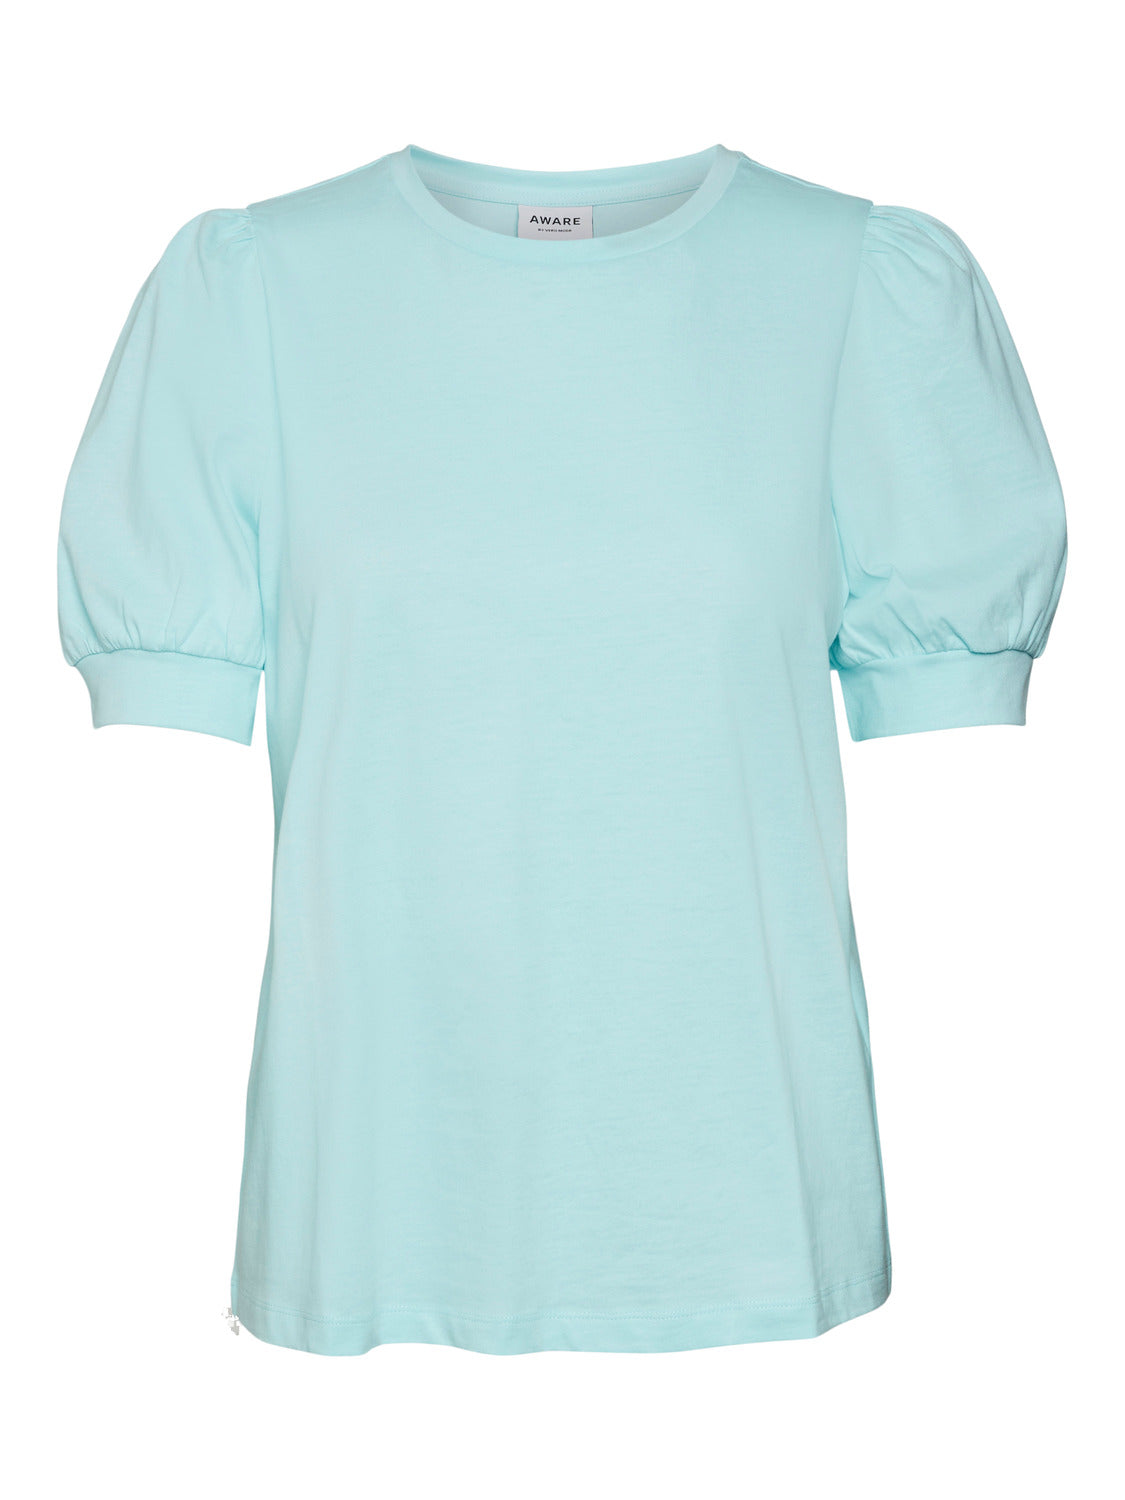 VMKERRY T-Shirts & Tops - Limpet Shell